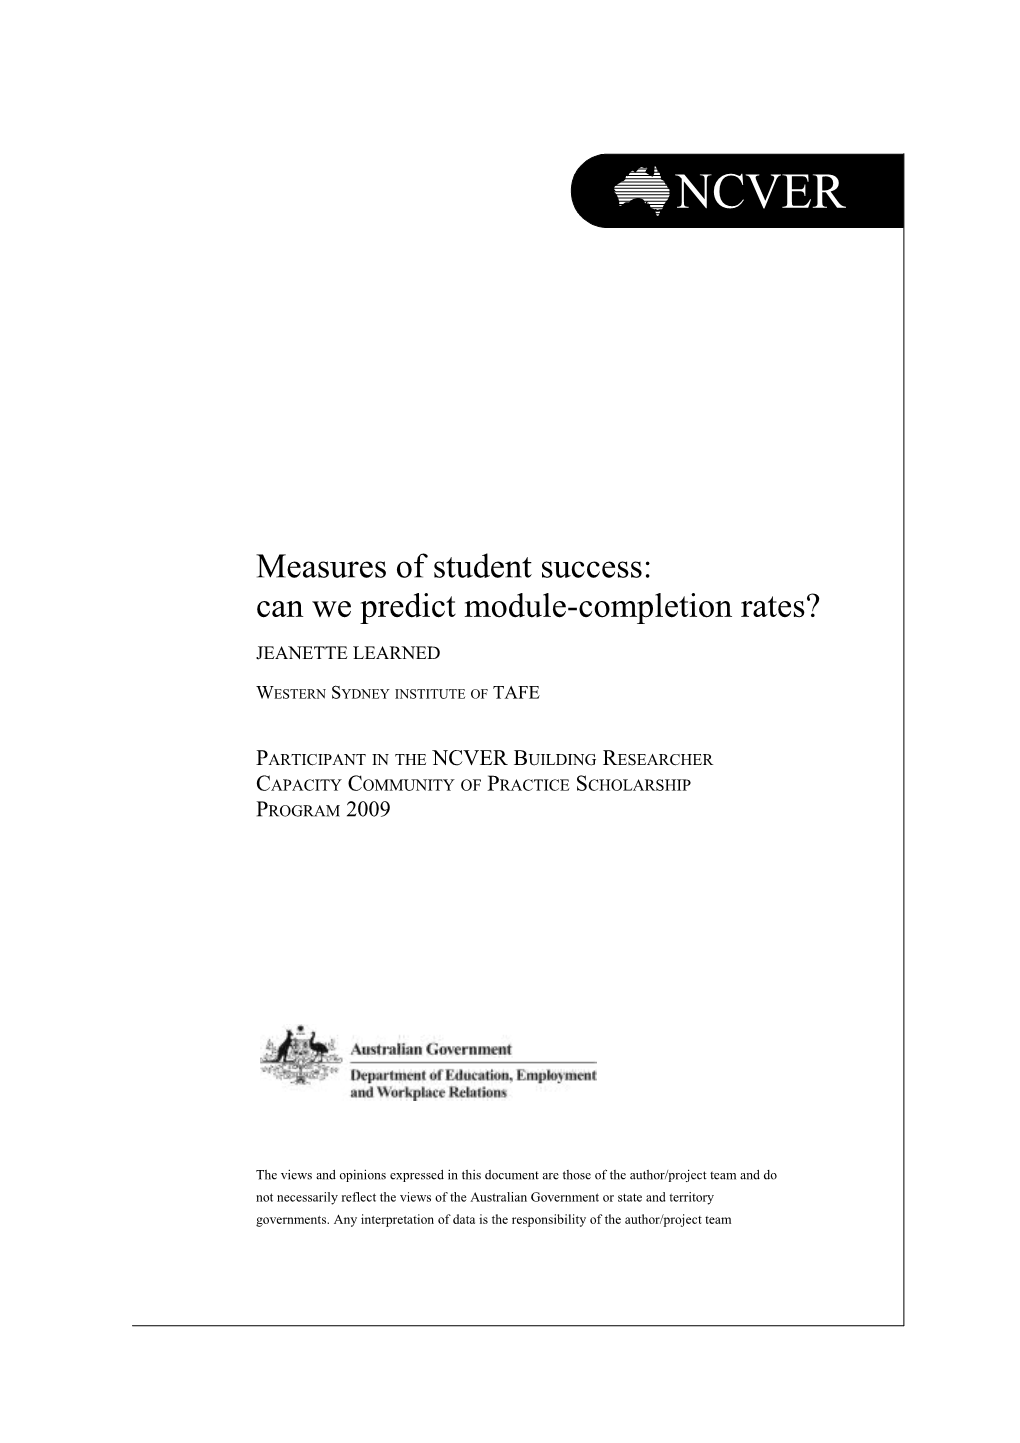 Measures of Student Success: Can We Predict Module-Completion Rates?